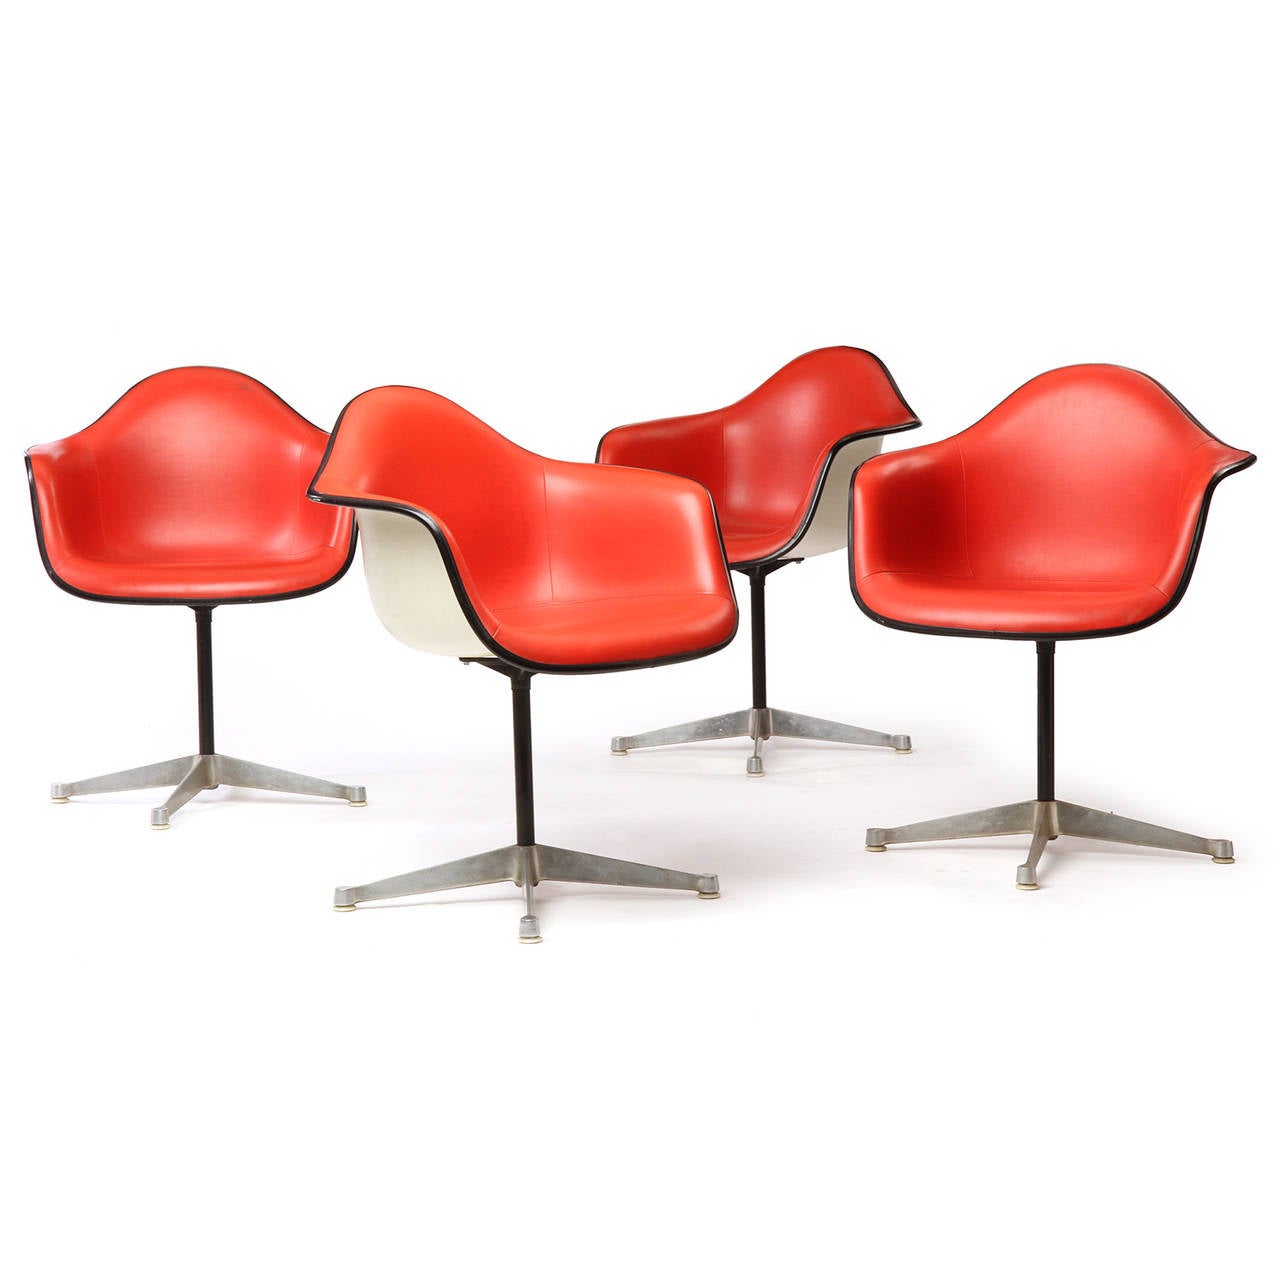 A vibrant group of swiveling armchairs having organically shaped seats with their expressive original red upholstery floating on lacquered stems rising from early four-pronged bases.